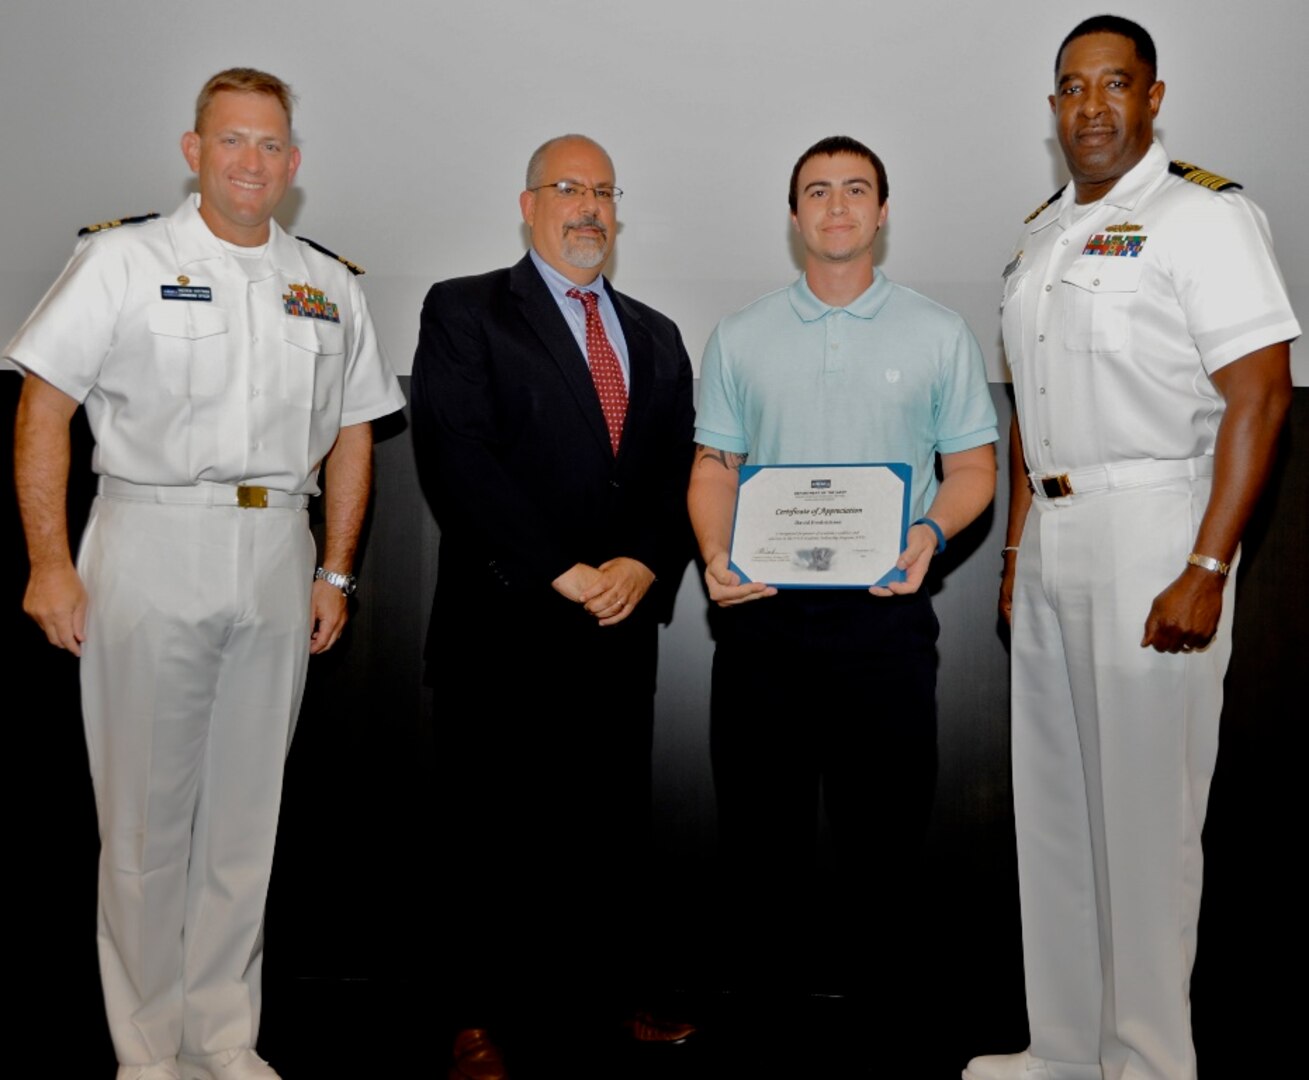 IMAGE: DAHLGREN, Va. - David Frederickson receives his certificate of achievement from Naval Surface Warfare Center Dahlgren Division (NSWCDD) Technical Director John Fiore, NSWCDD Commanding Officer Capt. Godfrey 'Gus' Weekes, right, and Combat Direction Systems Activity Dam Neck Commanding Officer Cmdr. Andrew Hoffman at the 2017 NSWCDD academic awards ceremony. Frederickson was recognized for completing his master's in business administration from Old Dominion University, and commended for his commitment to personal and professional development.